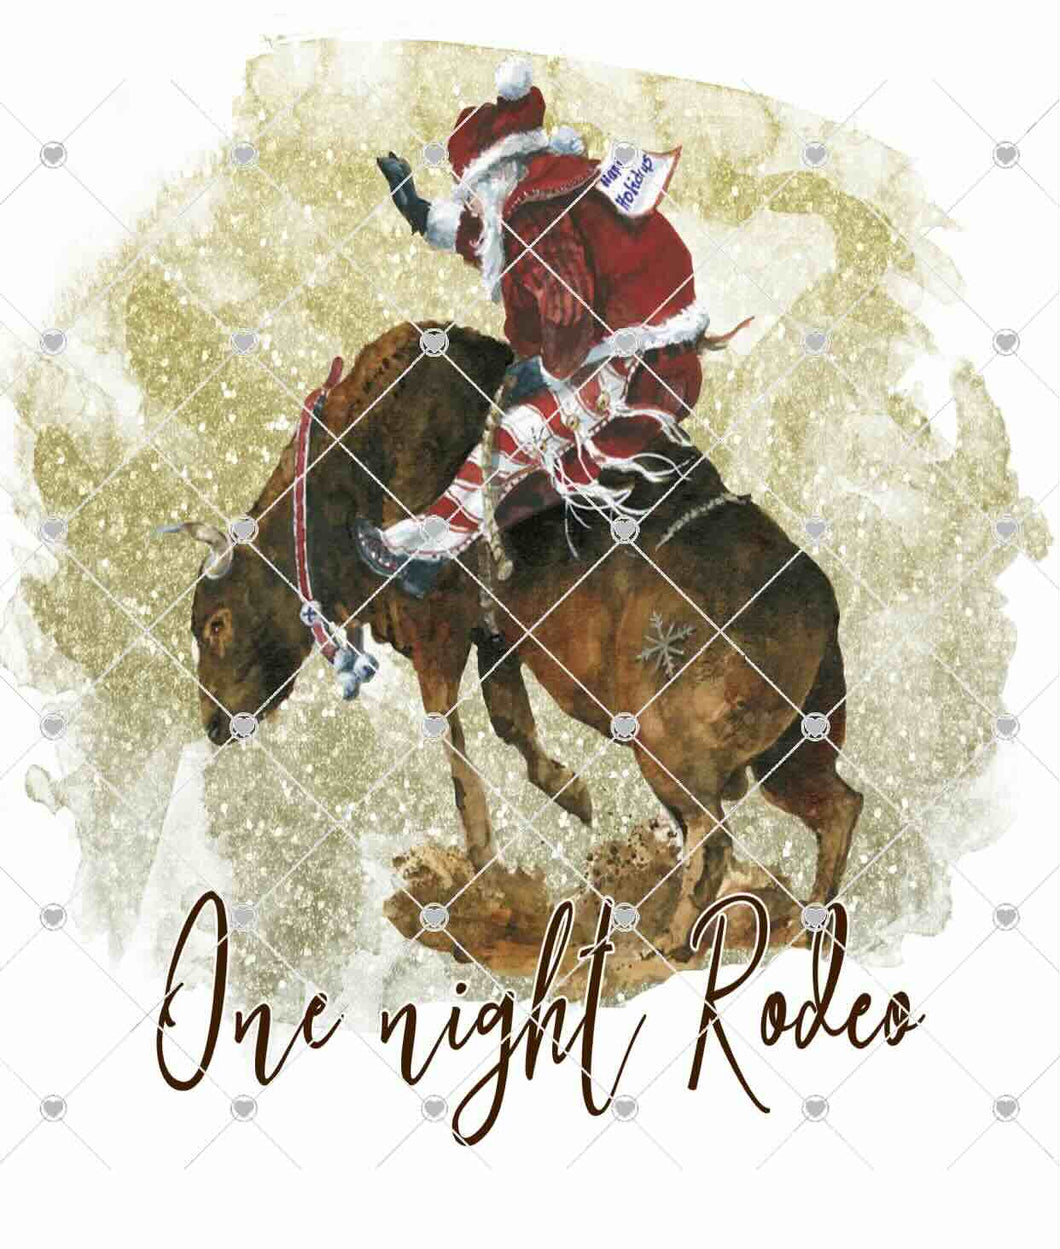 One night rodeo sublimation transfer